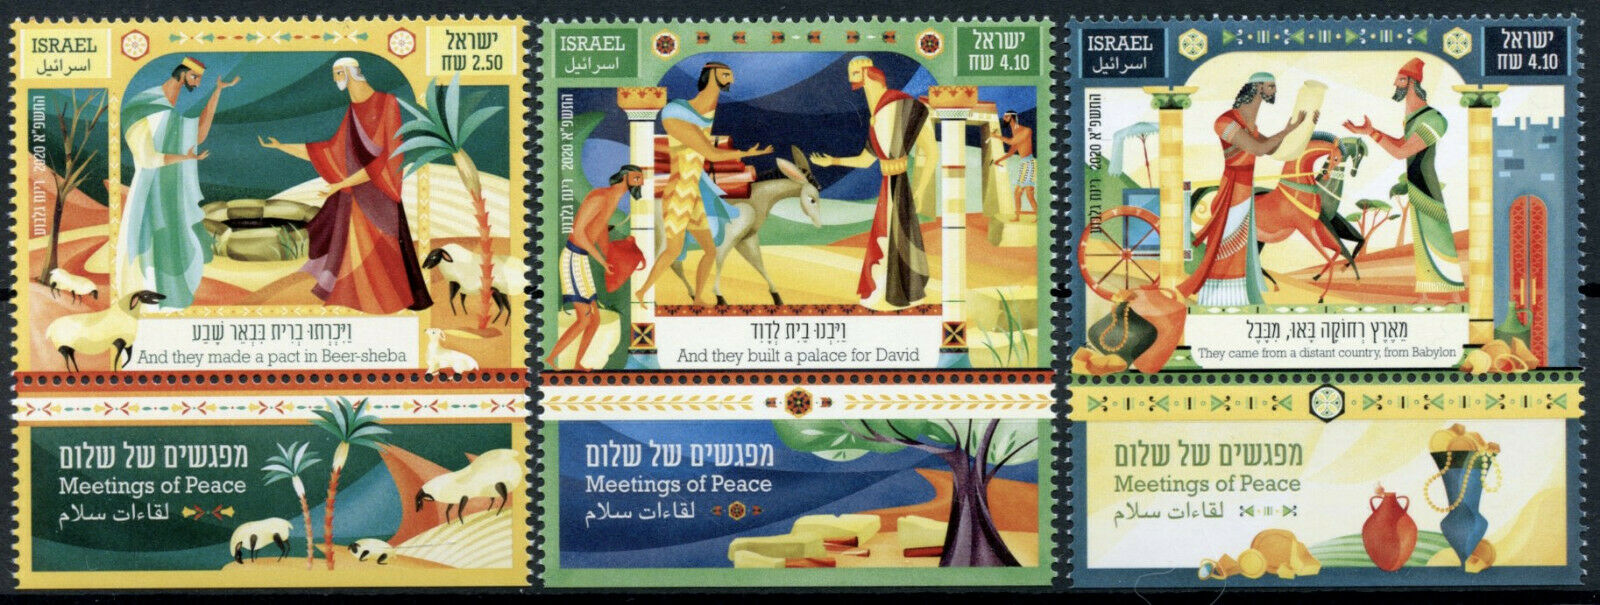 Israel Religion Stamps 2020 MNH Meetings of Peace Judaism Abraham 3v Set